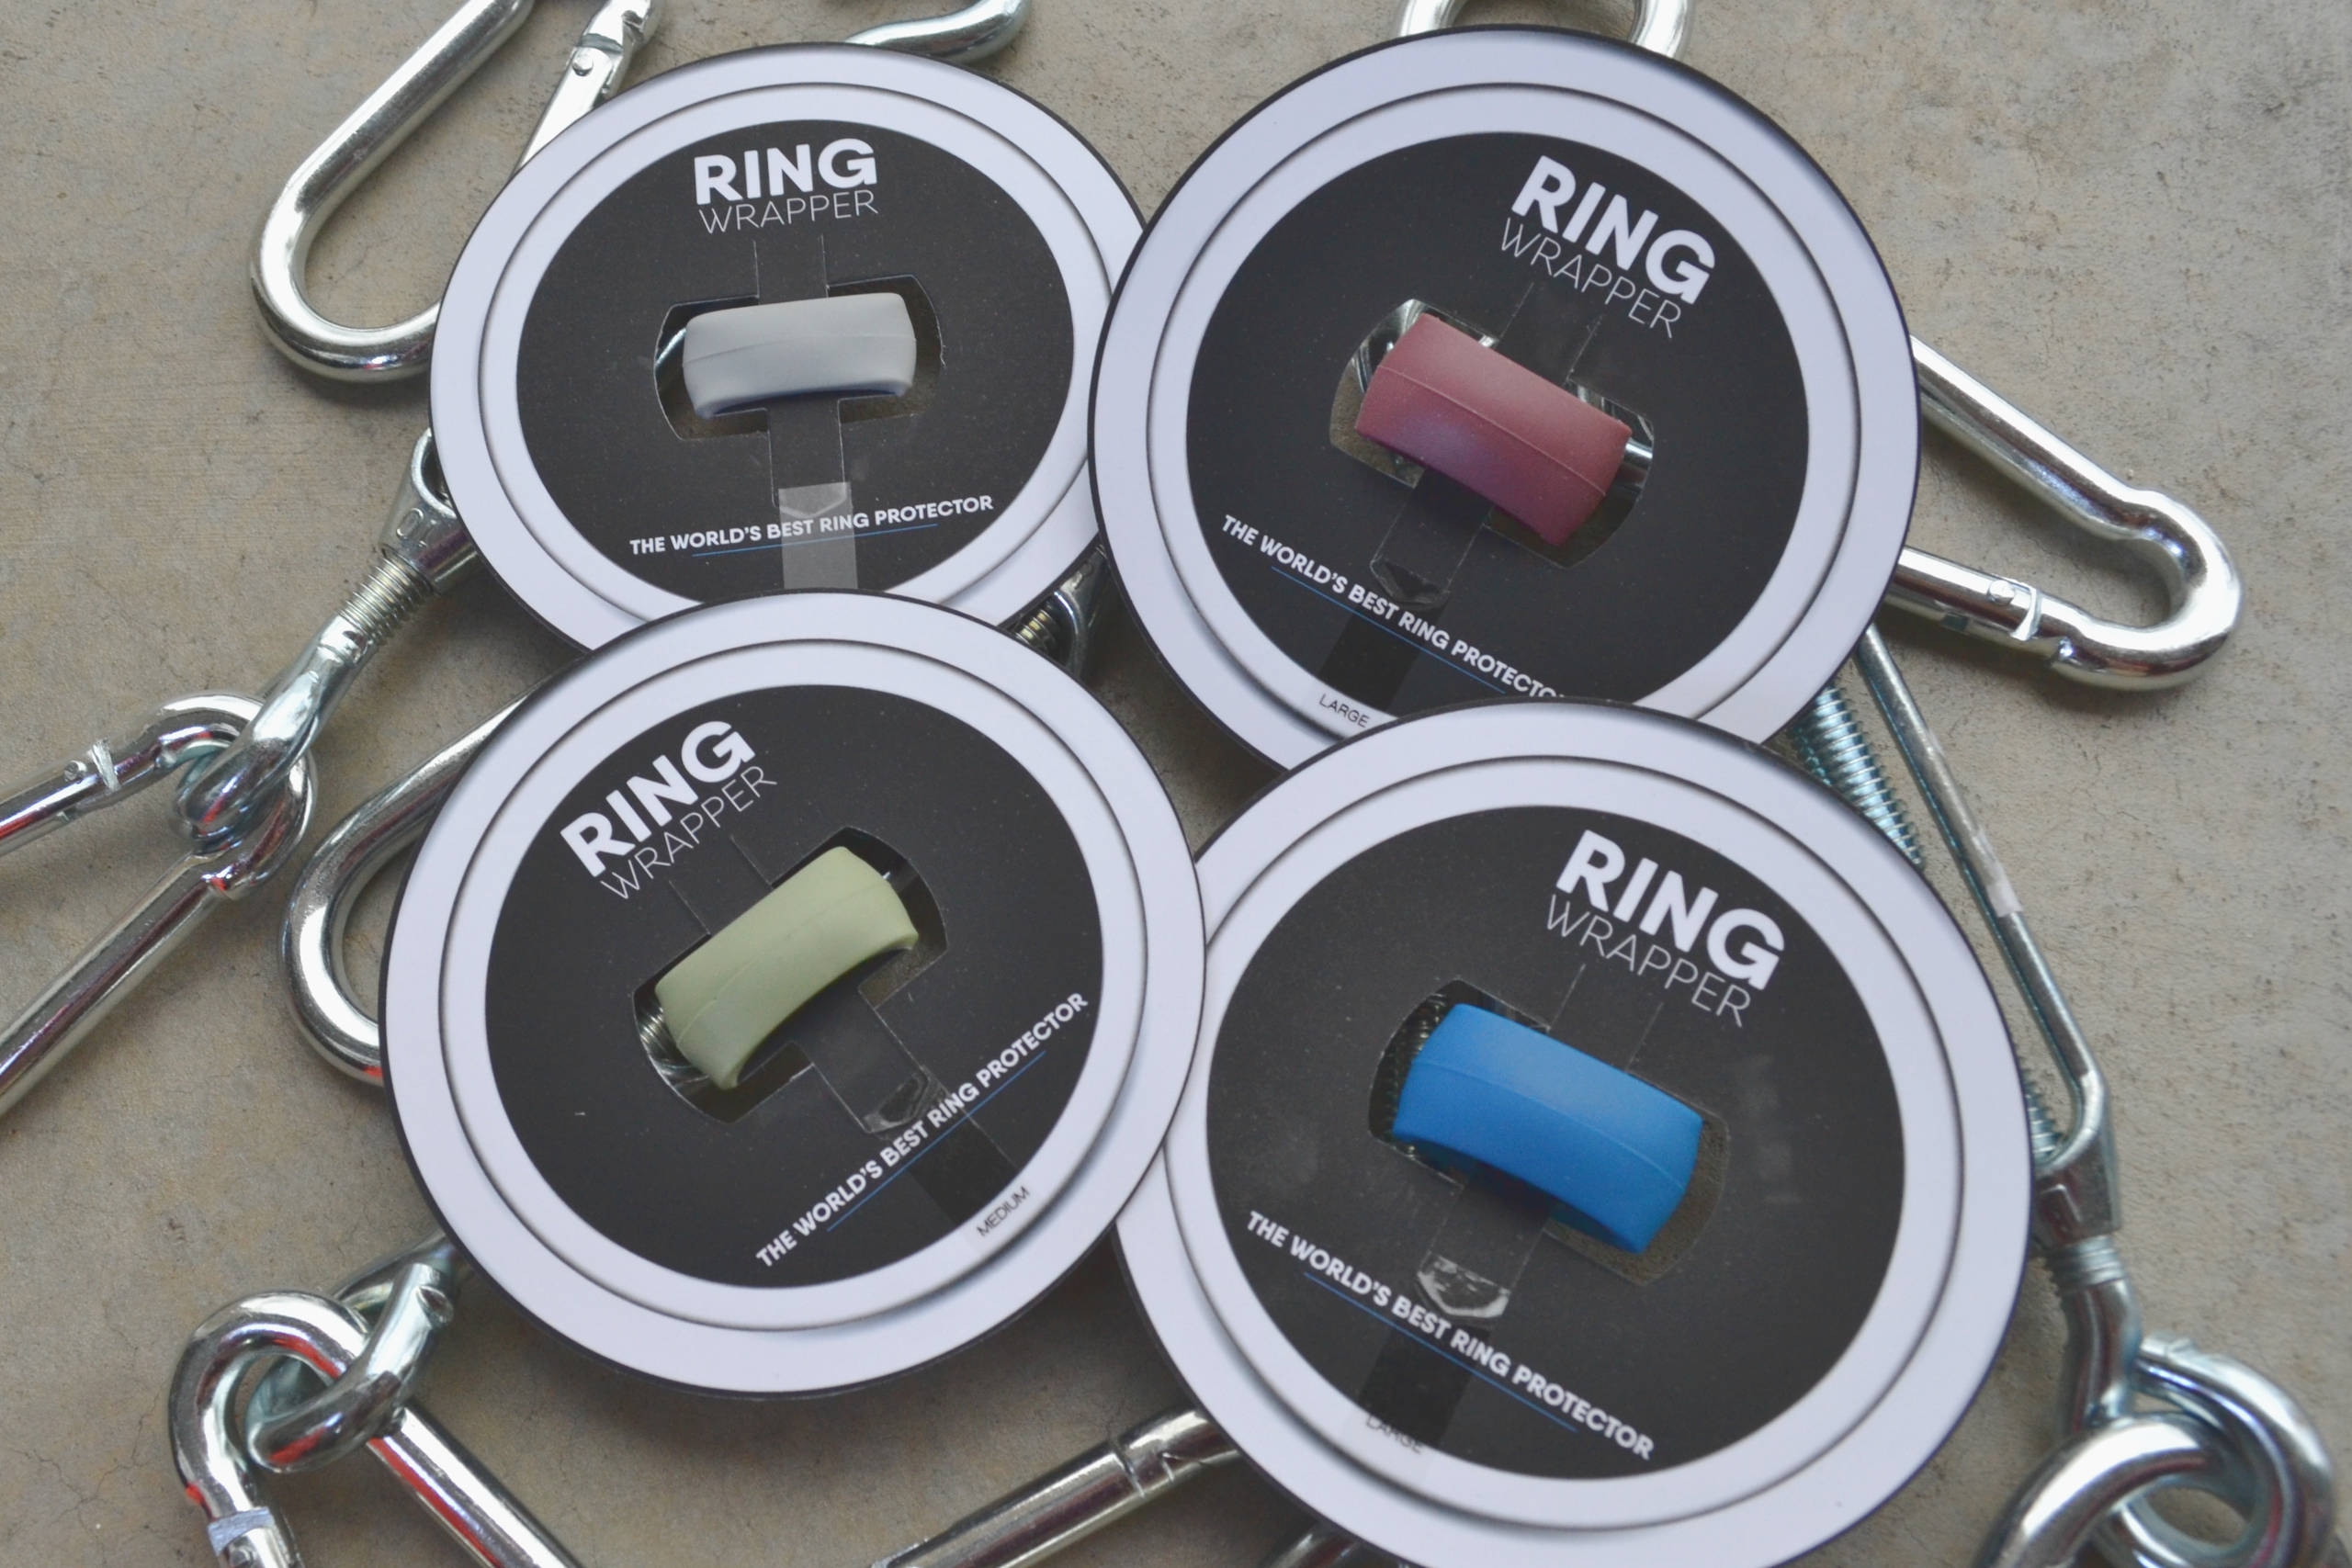 Ring Wrapper - The World's Best Ring Protector